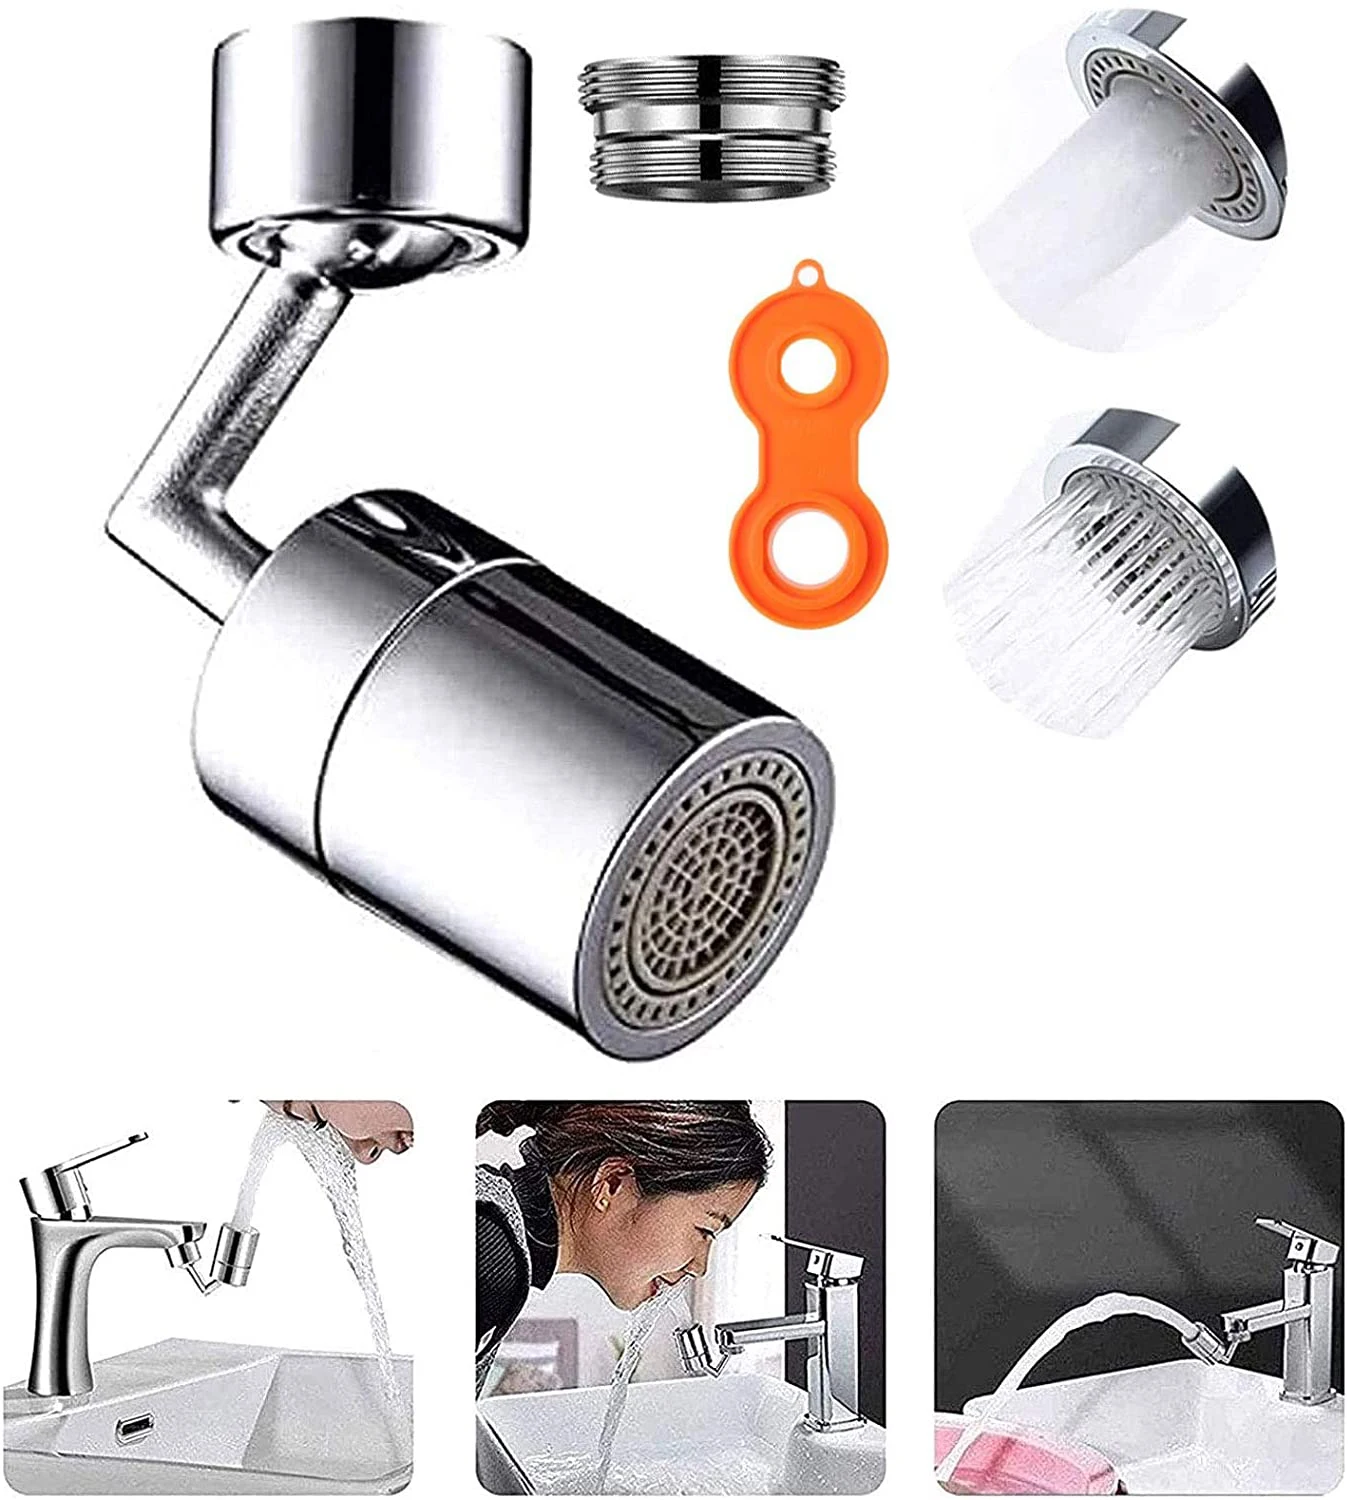 

720° Rotatable Universal Splash Filter Faucet Extender Aerator Sprayer Head with Swivel Sink Faucet for Kitchen and Bathroom